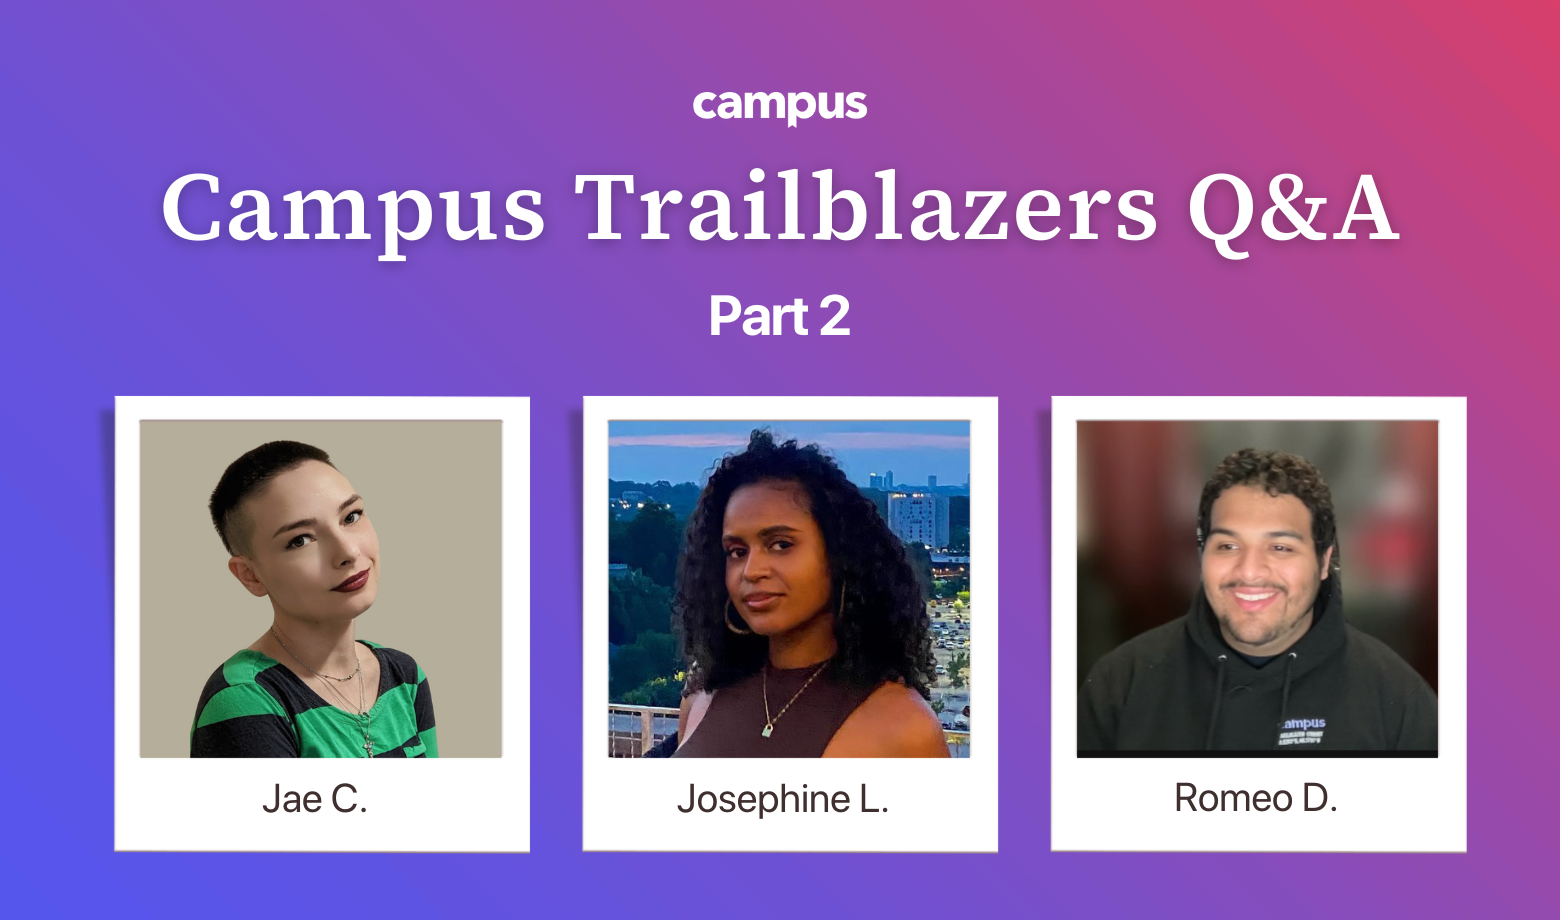 Campus Trailblazers Q&A Part 2: What Surprised You About Campus?